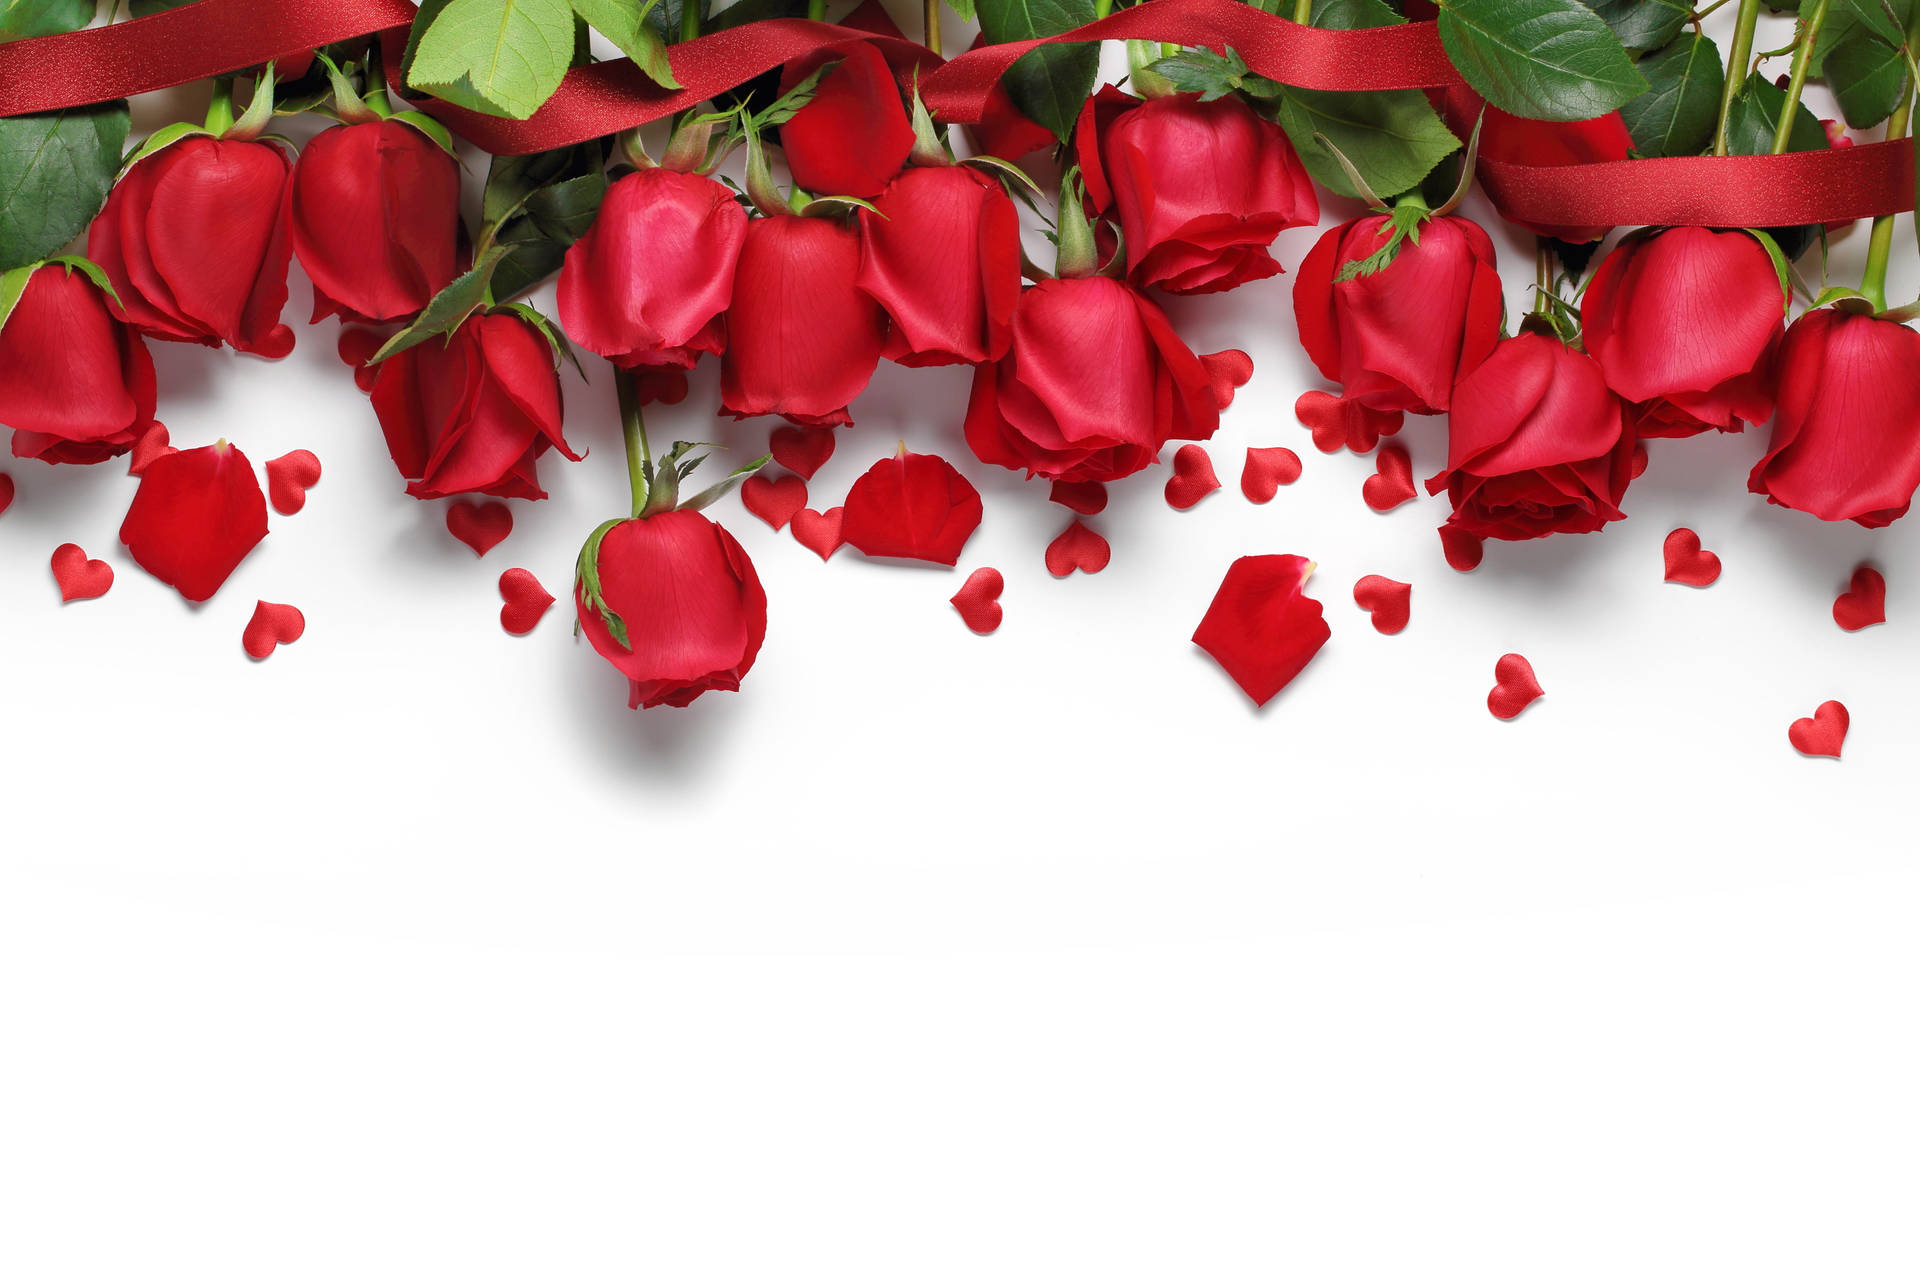 Red Roses Heart Petals Background